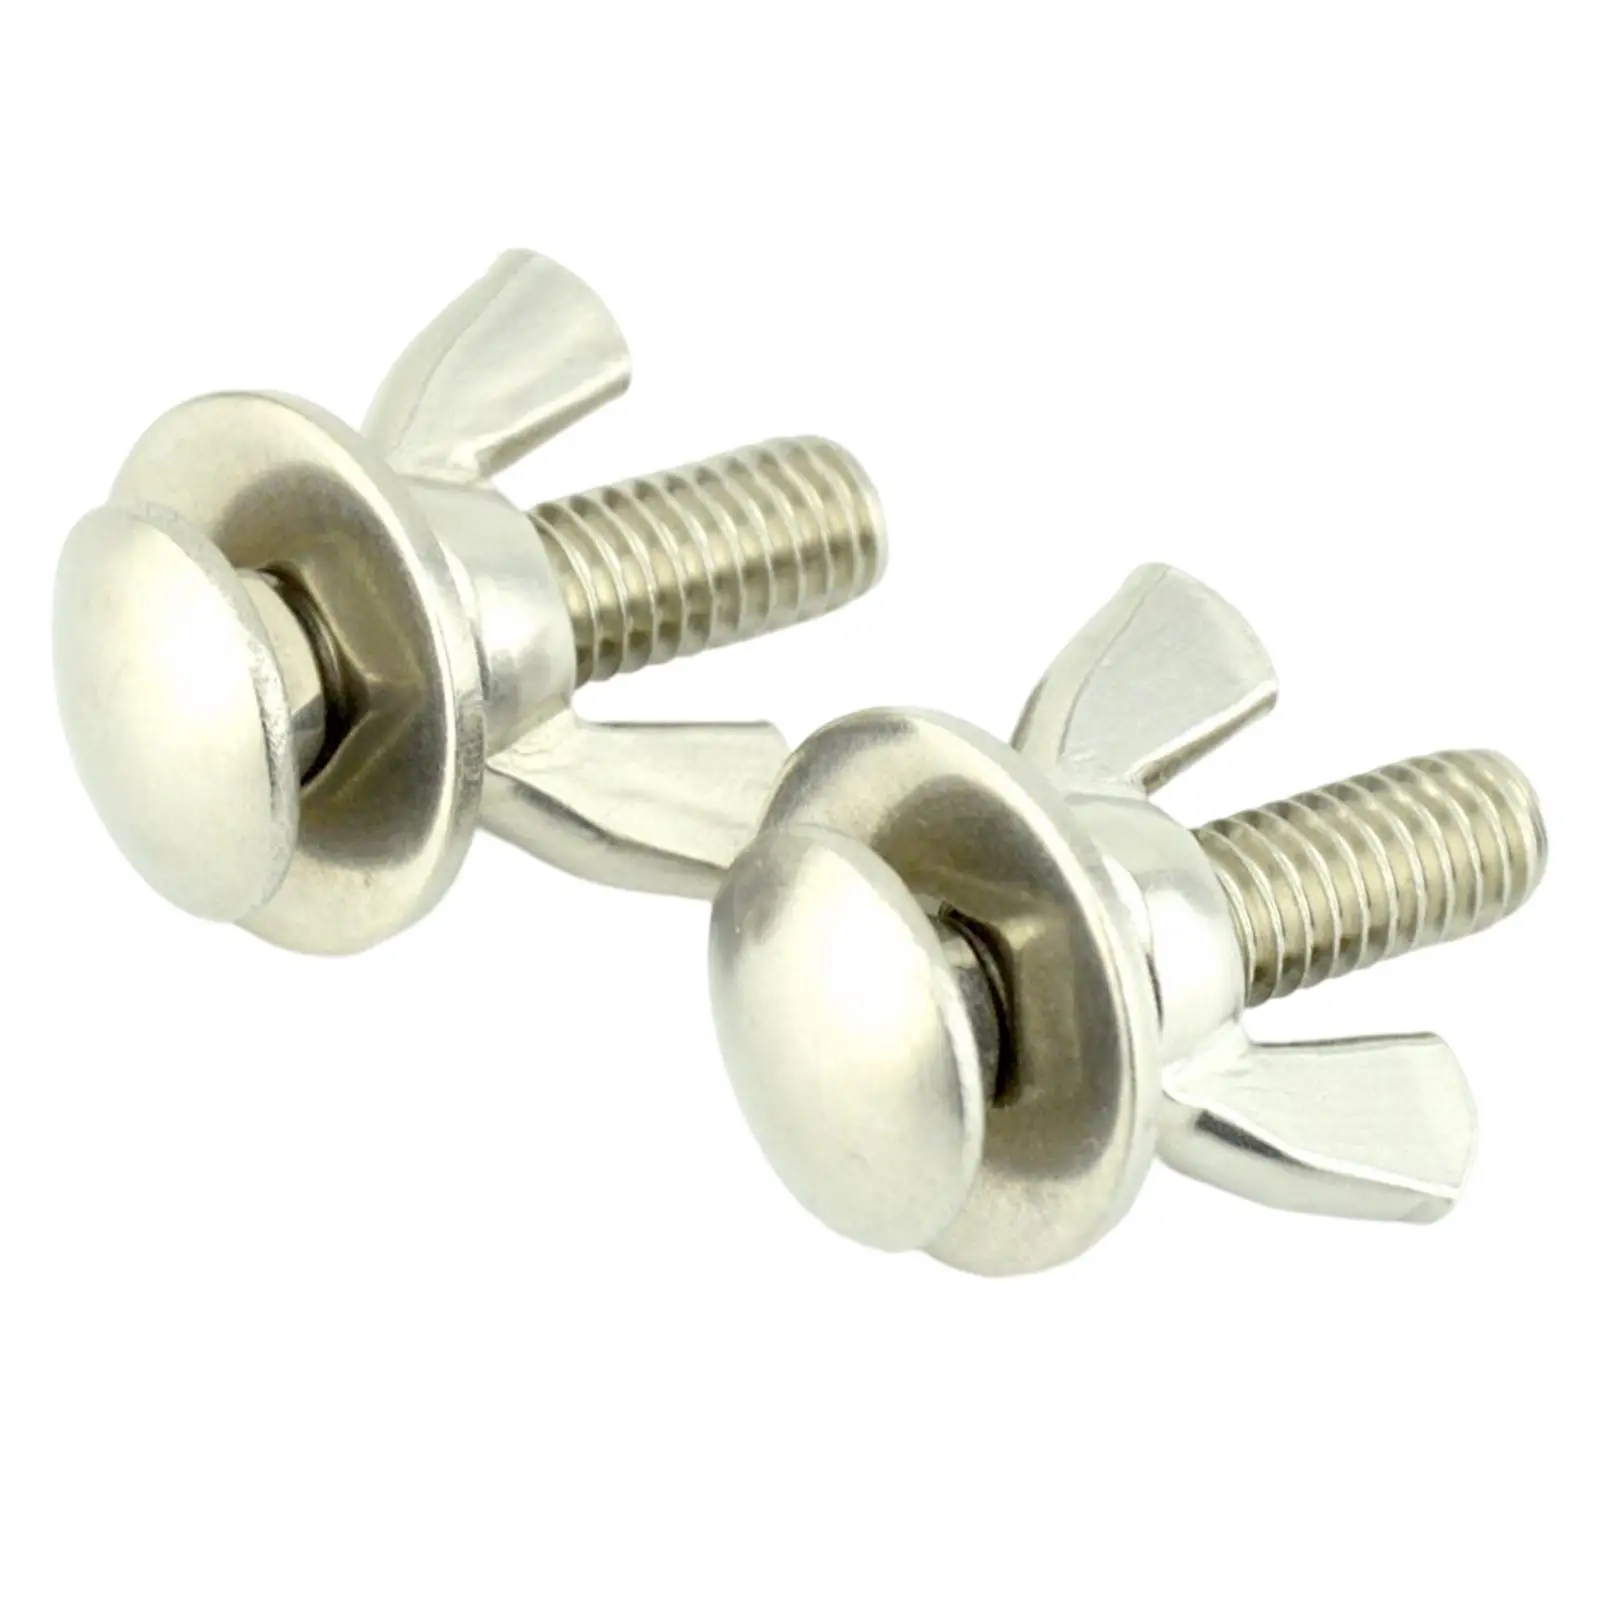 2x Tech Diving Butterfly Screw Bolts Wing Nut Set 316 Stainless Steel Thumb Screws Fastener Fit for Backplate Accessories